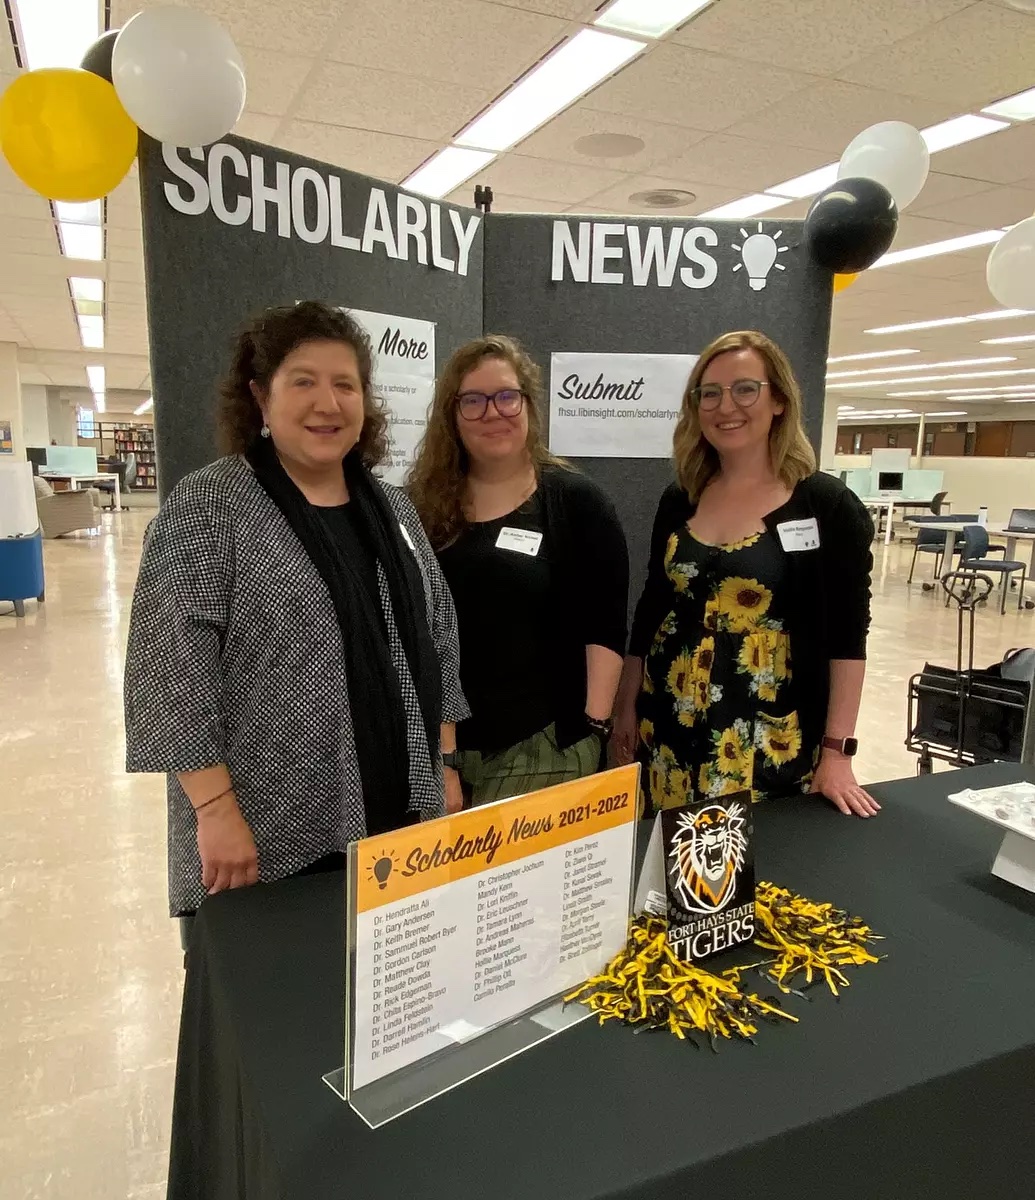 Dr. Kim Perez, Dr. Amber Nickell, and Hollie Marquess from the FHSU Department of History.